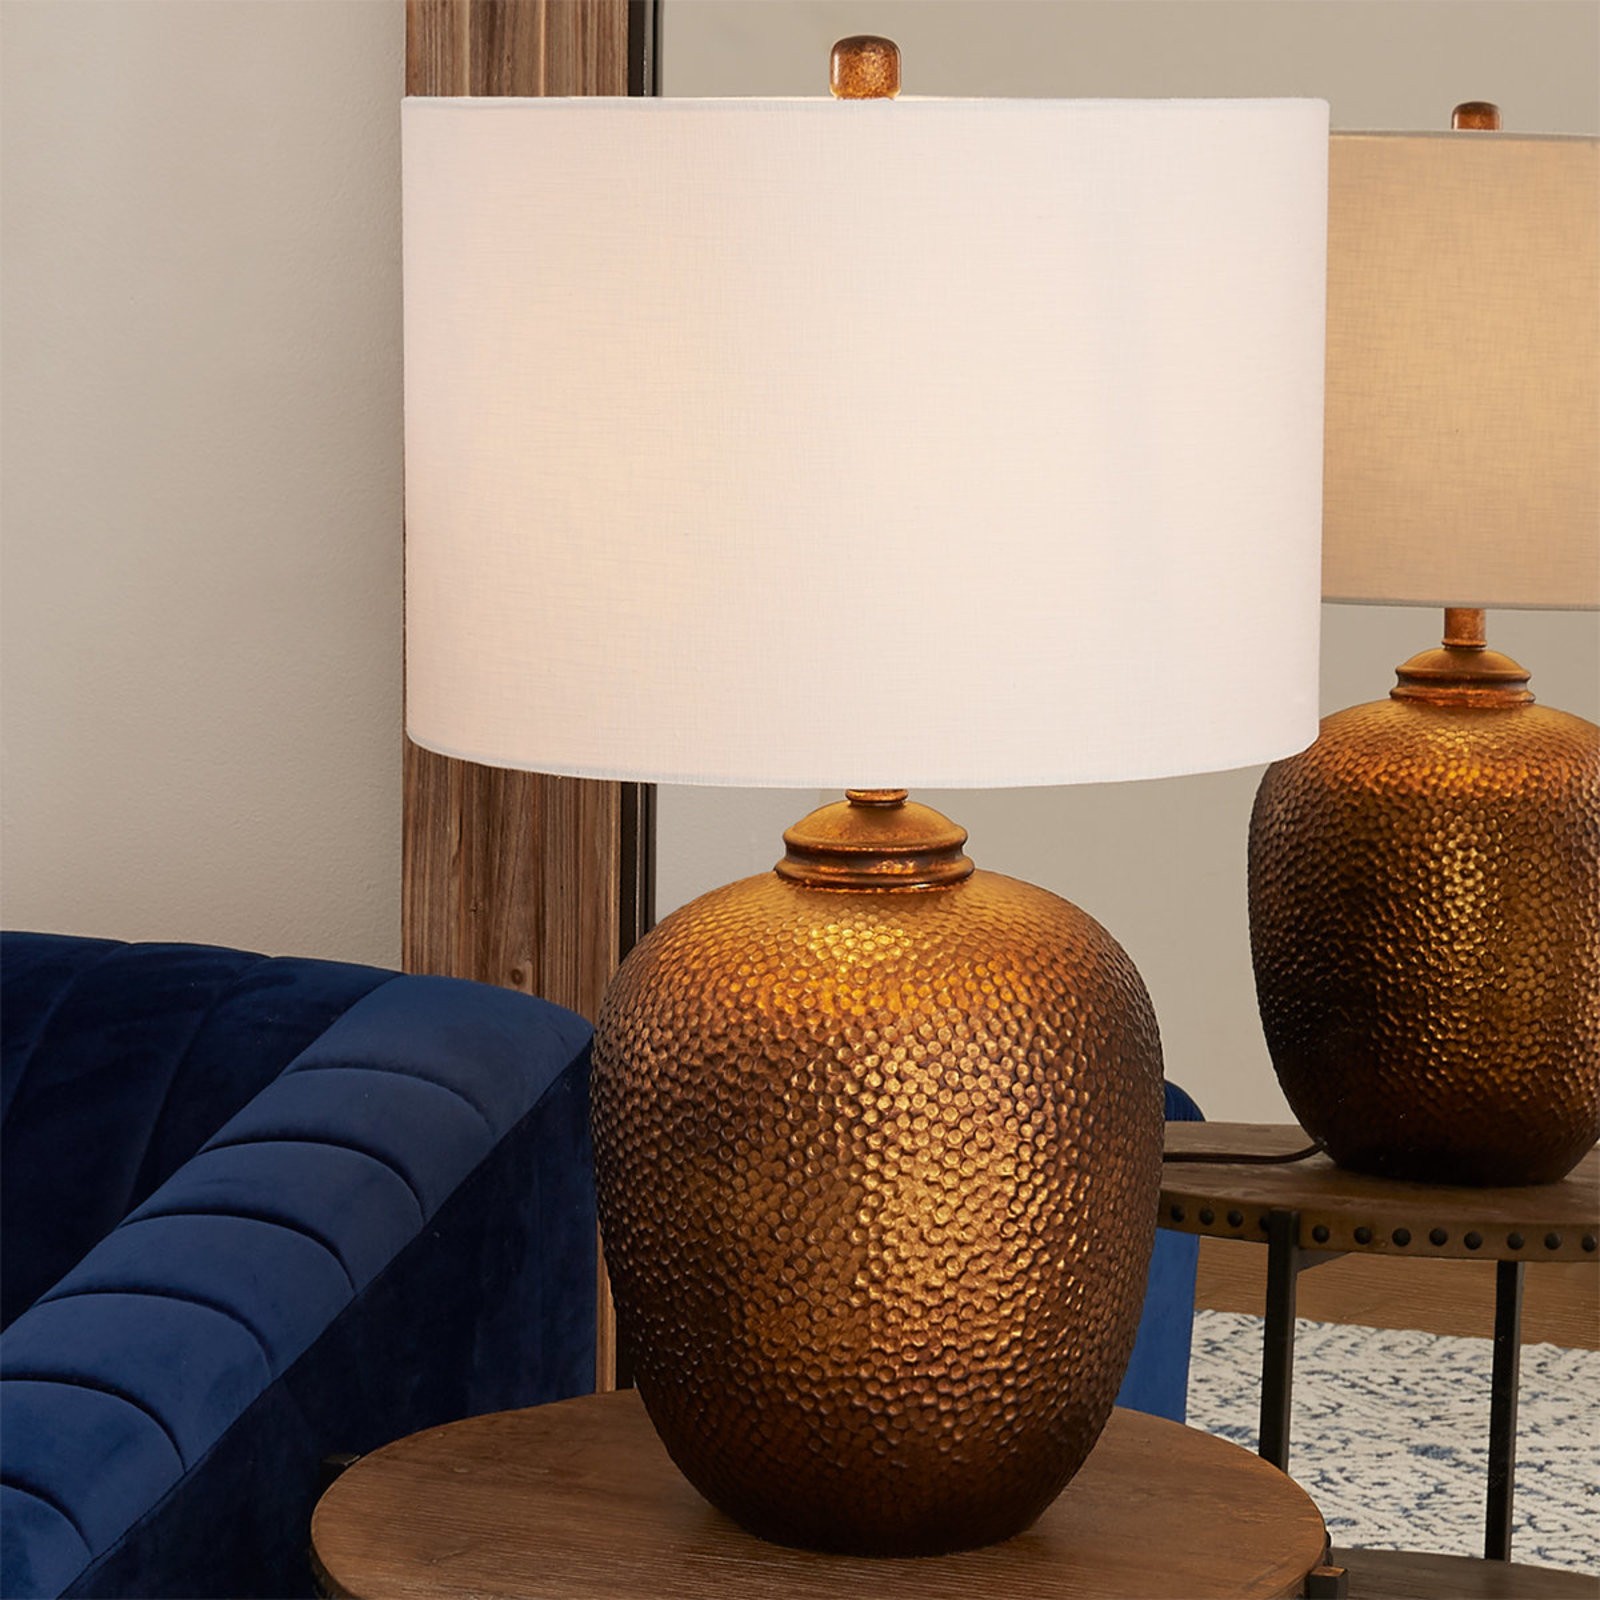 Hammered copper table lamp shades of light